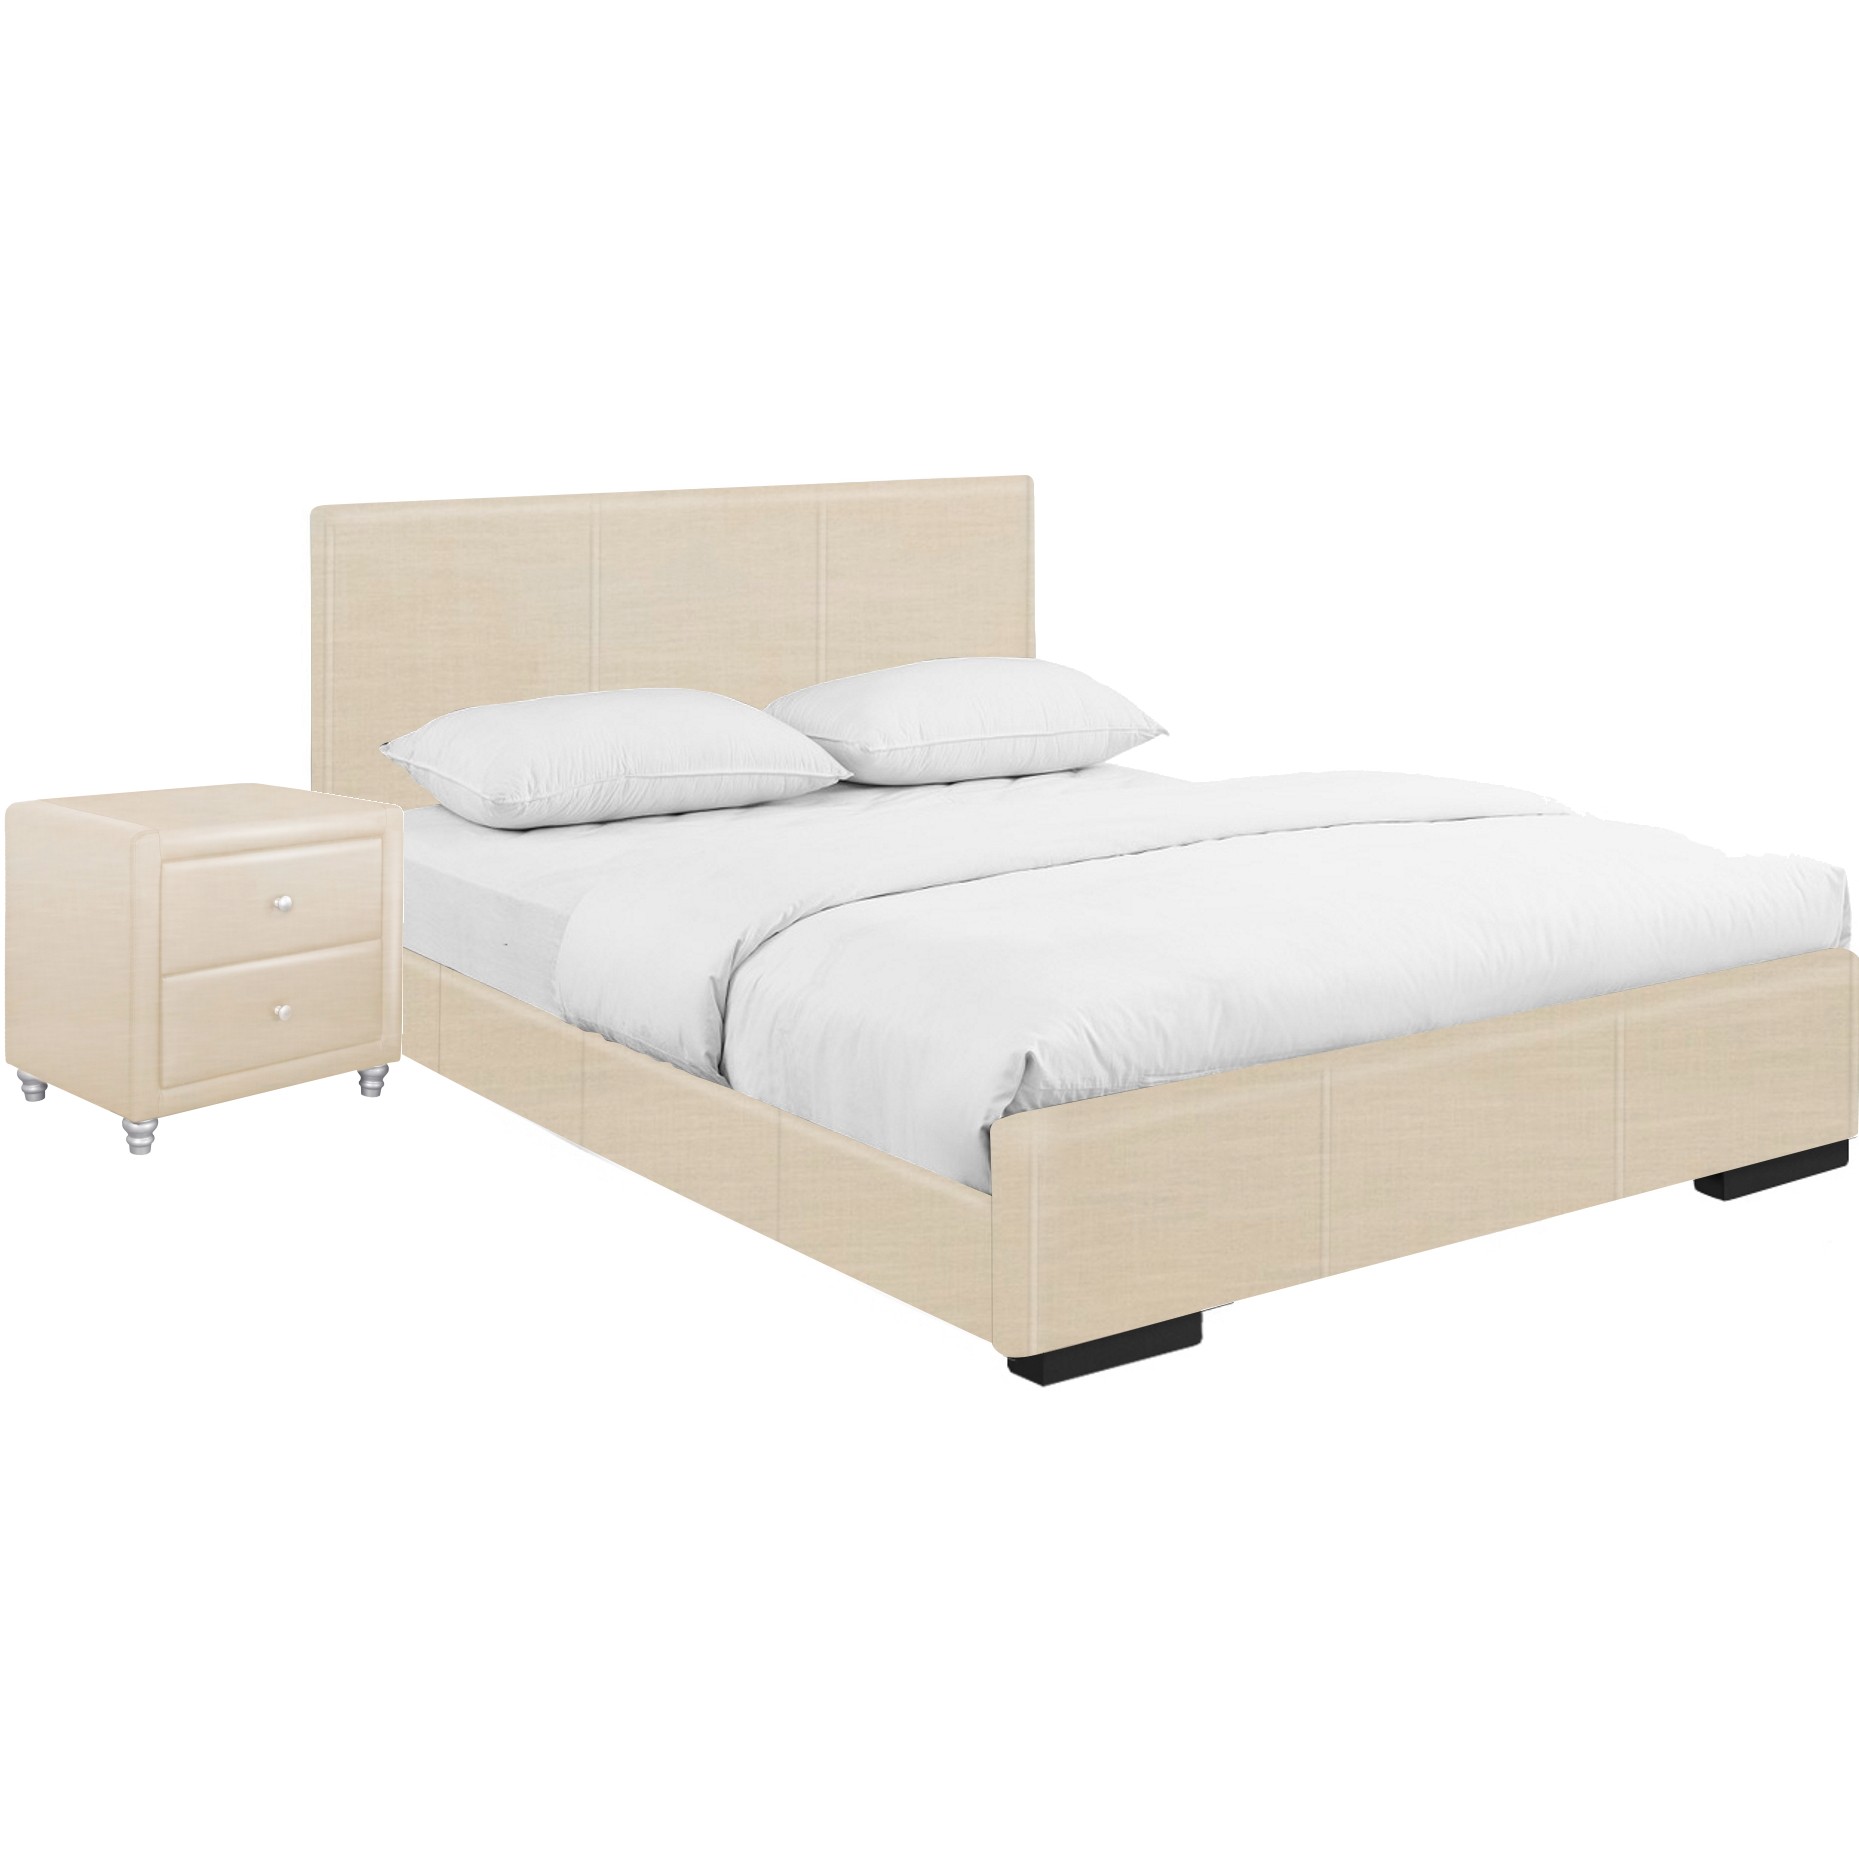 Solid Manufactured Wood Beige Standard Bed Upholstered With Headboard-397065-1